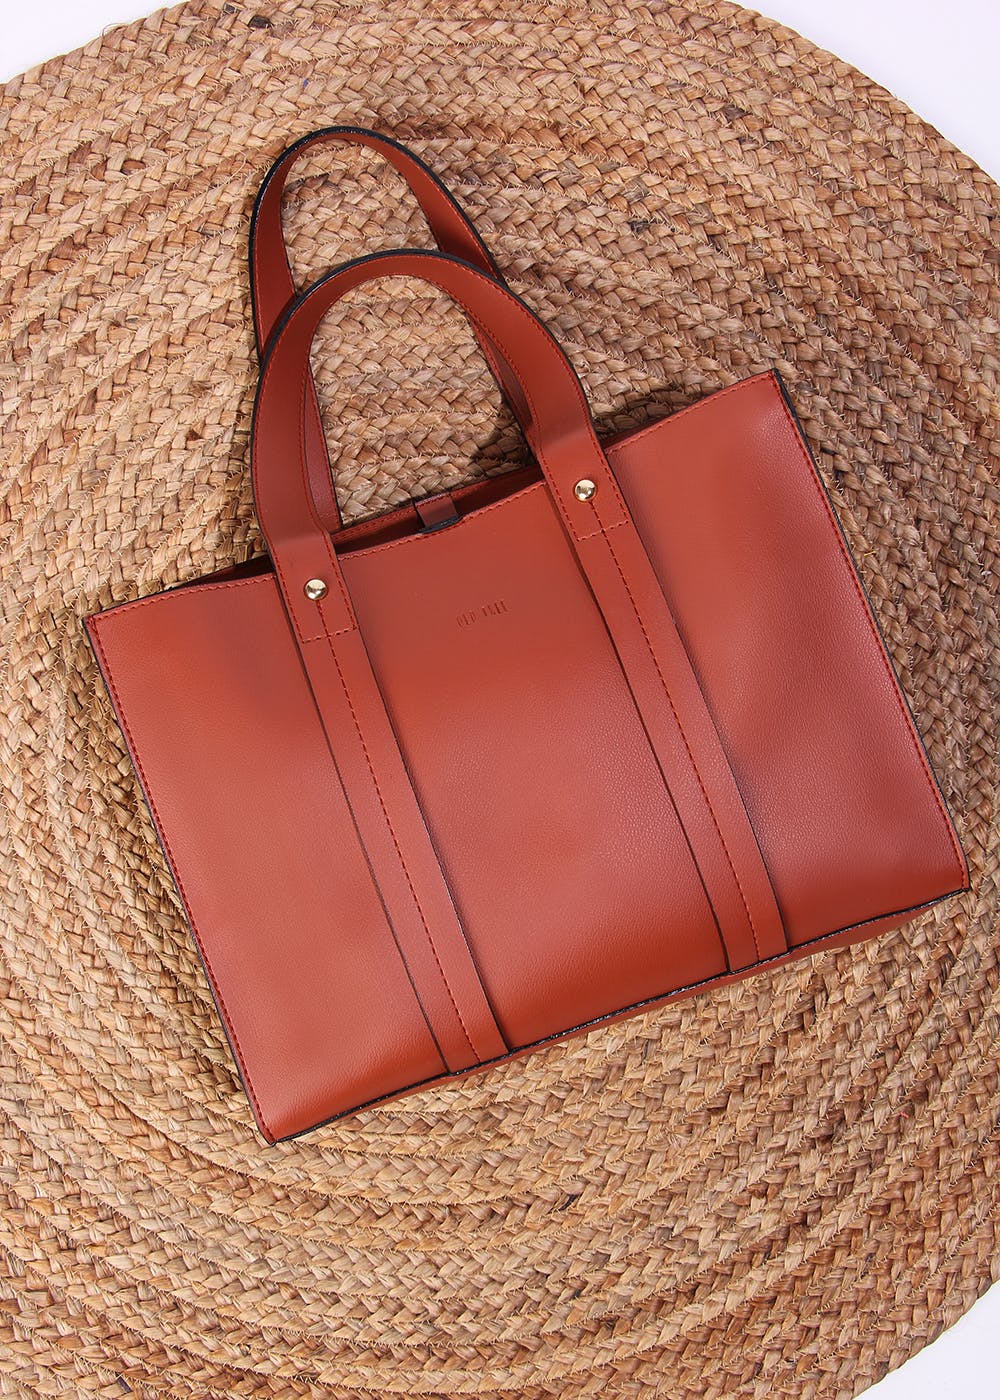 Shop For INR 5,000 On LBB & Win This Old Tree Tote | LBB